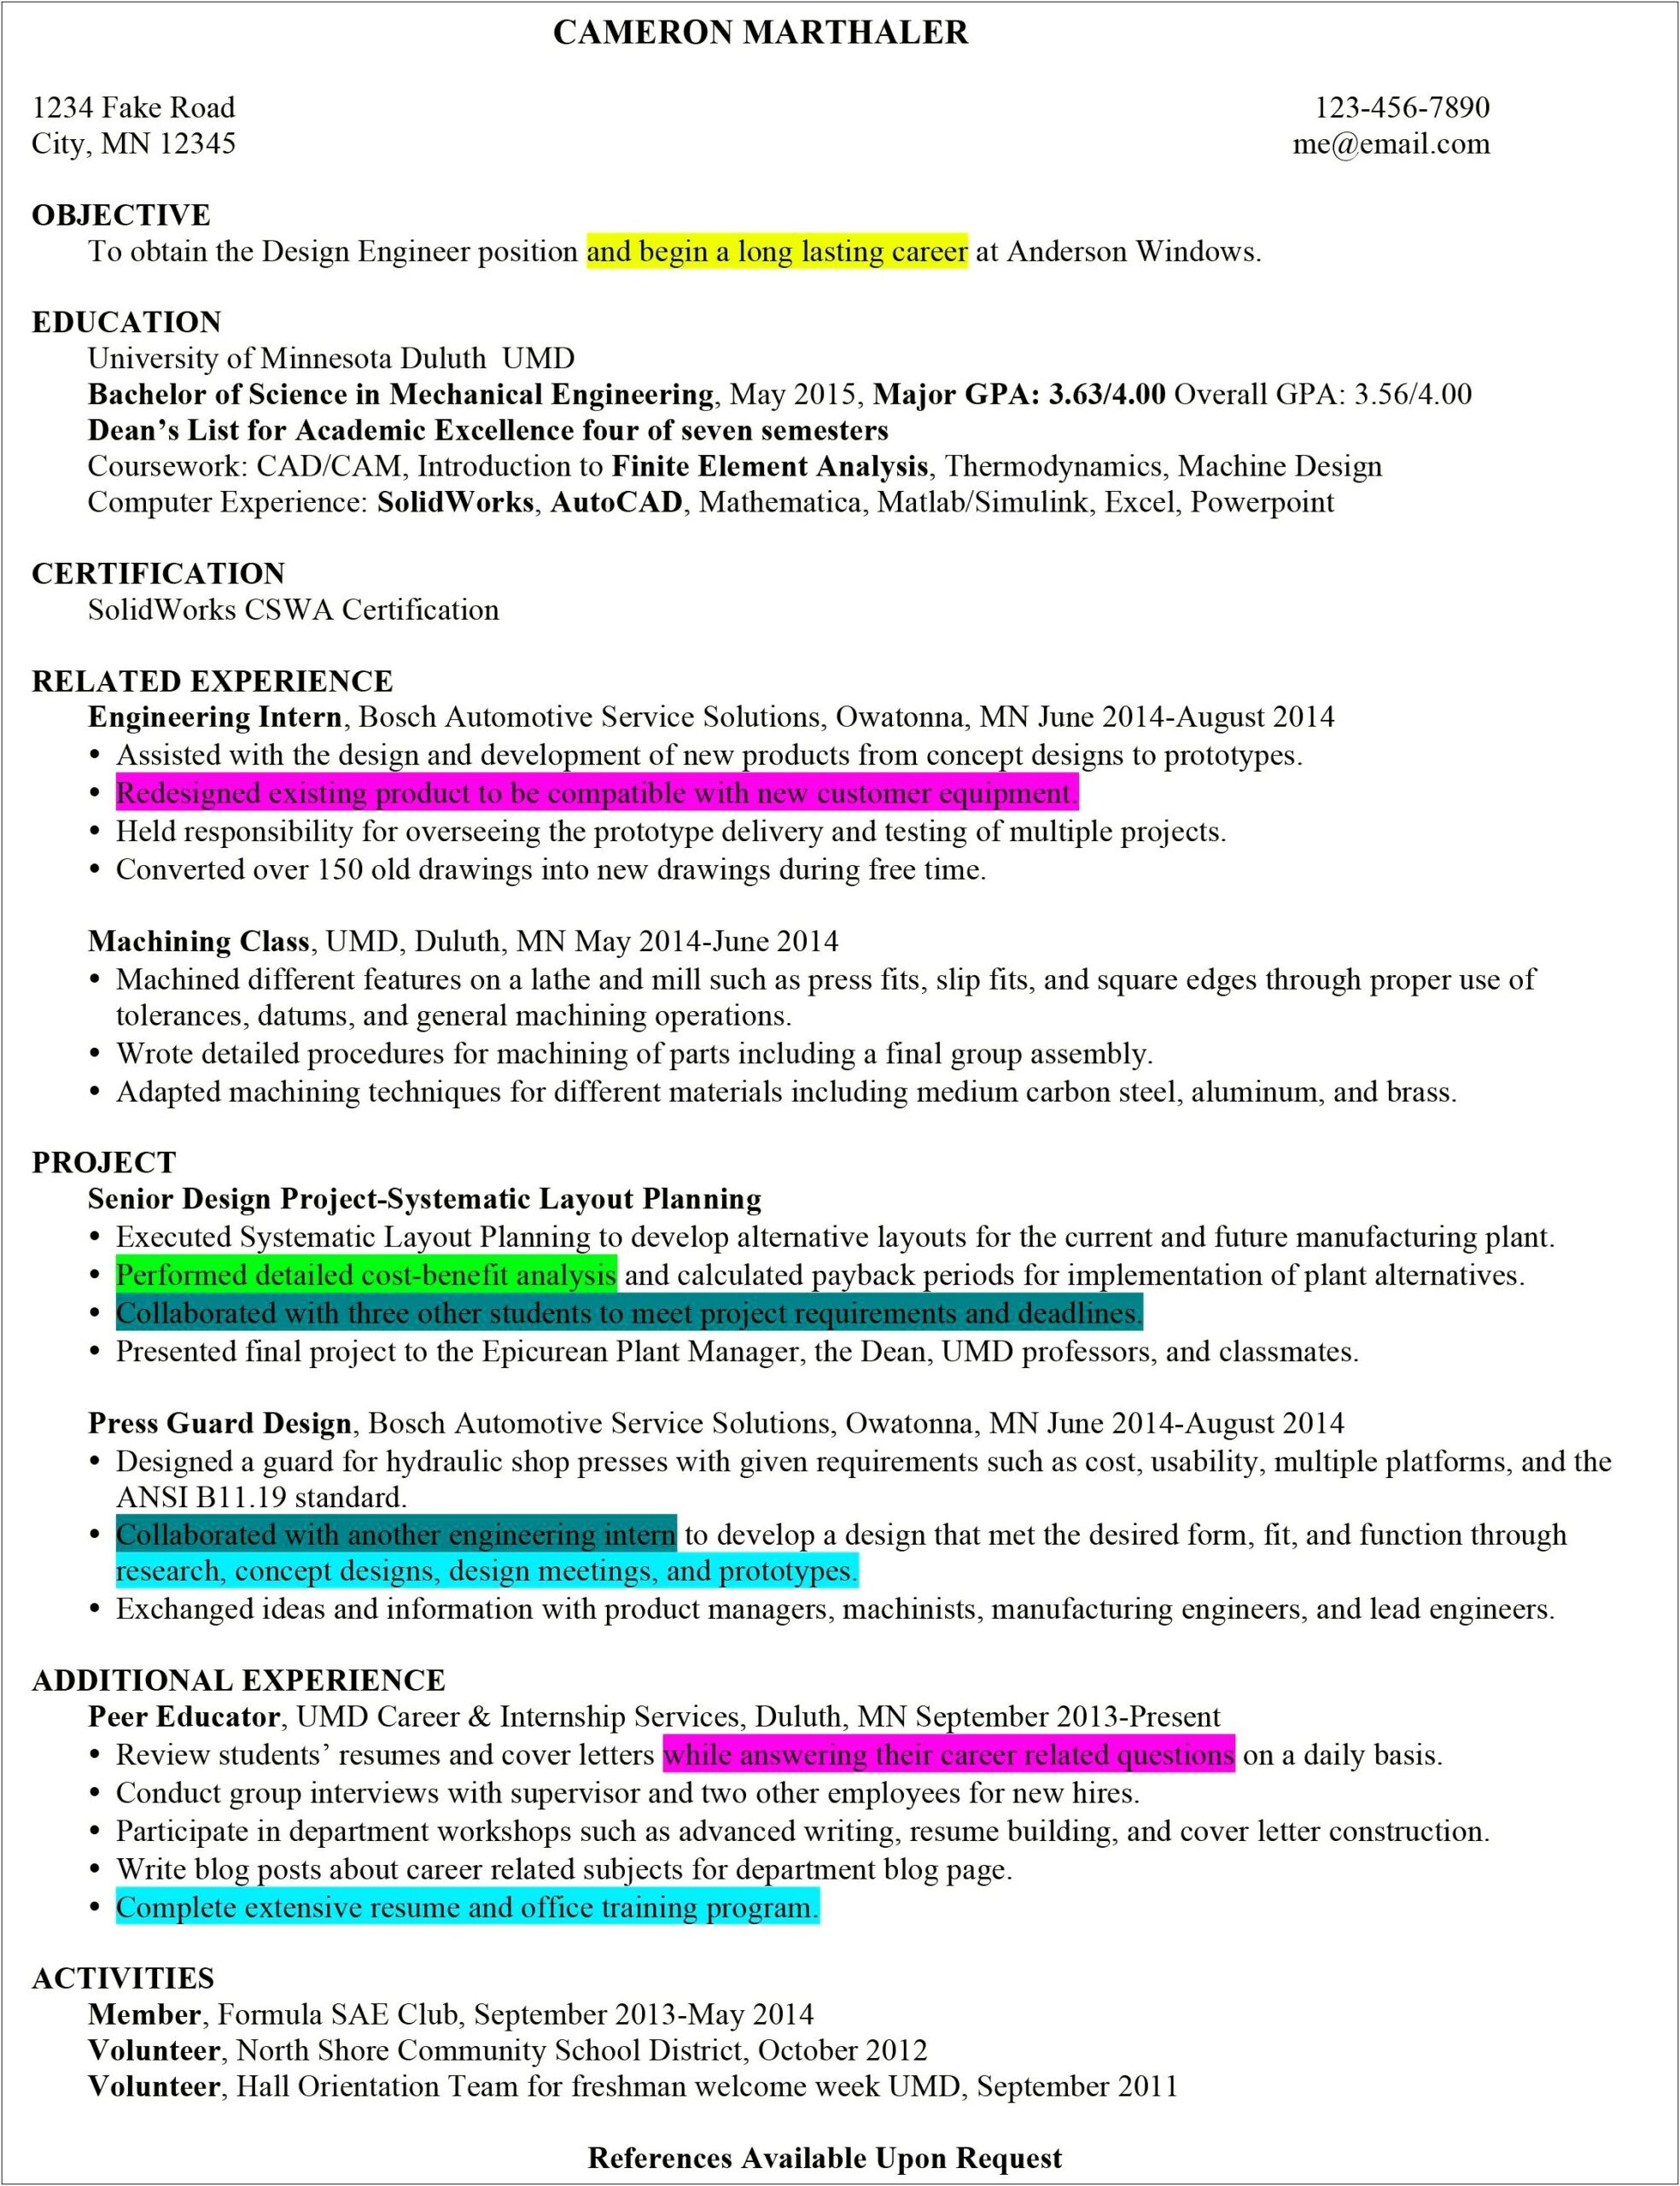 Examples Of Strengths To List On A Resume